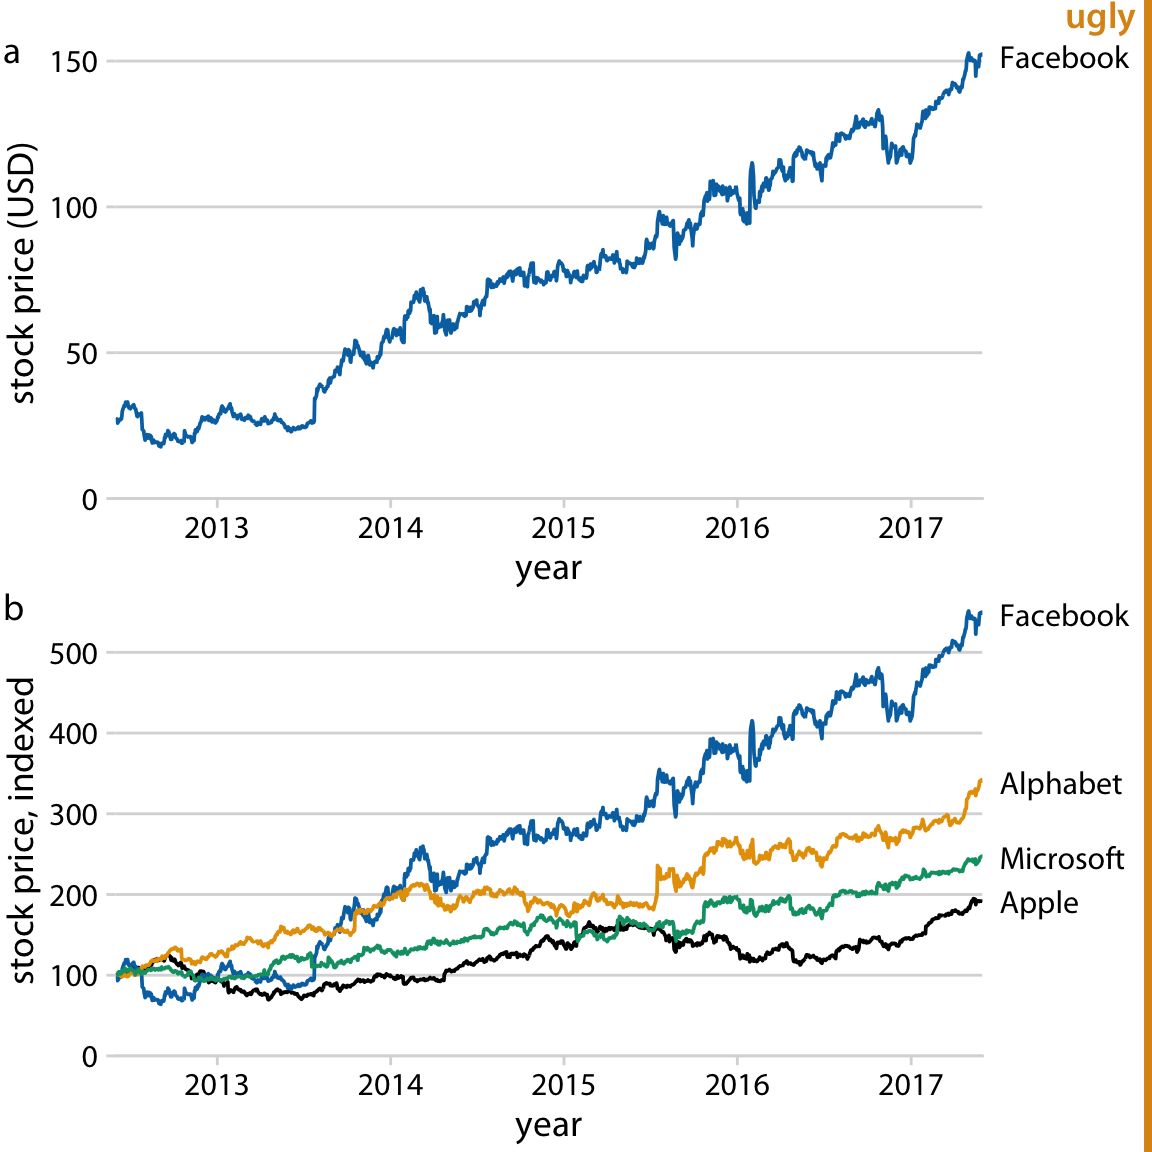 Growth of Facebook stock price over a five-year interval and comparison with other tech stocks. (a) The Facebook stock price rose from around $25/share in mid-2012 to $150/share in mid-2017. (b) The prices of other large tech companies did not rise comparably over the same time period. Prices have been indexed to 100 on June 1, 2012 to allow for easy comparison. This figure is labeled as “ugly” because parts (a) and (b) are repetitive. Data source: Yahoo Finance